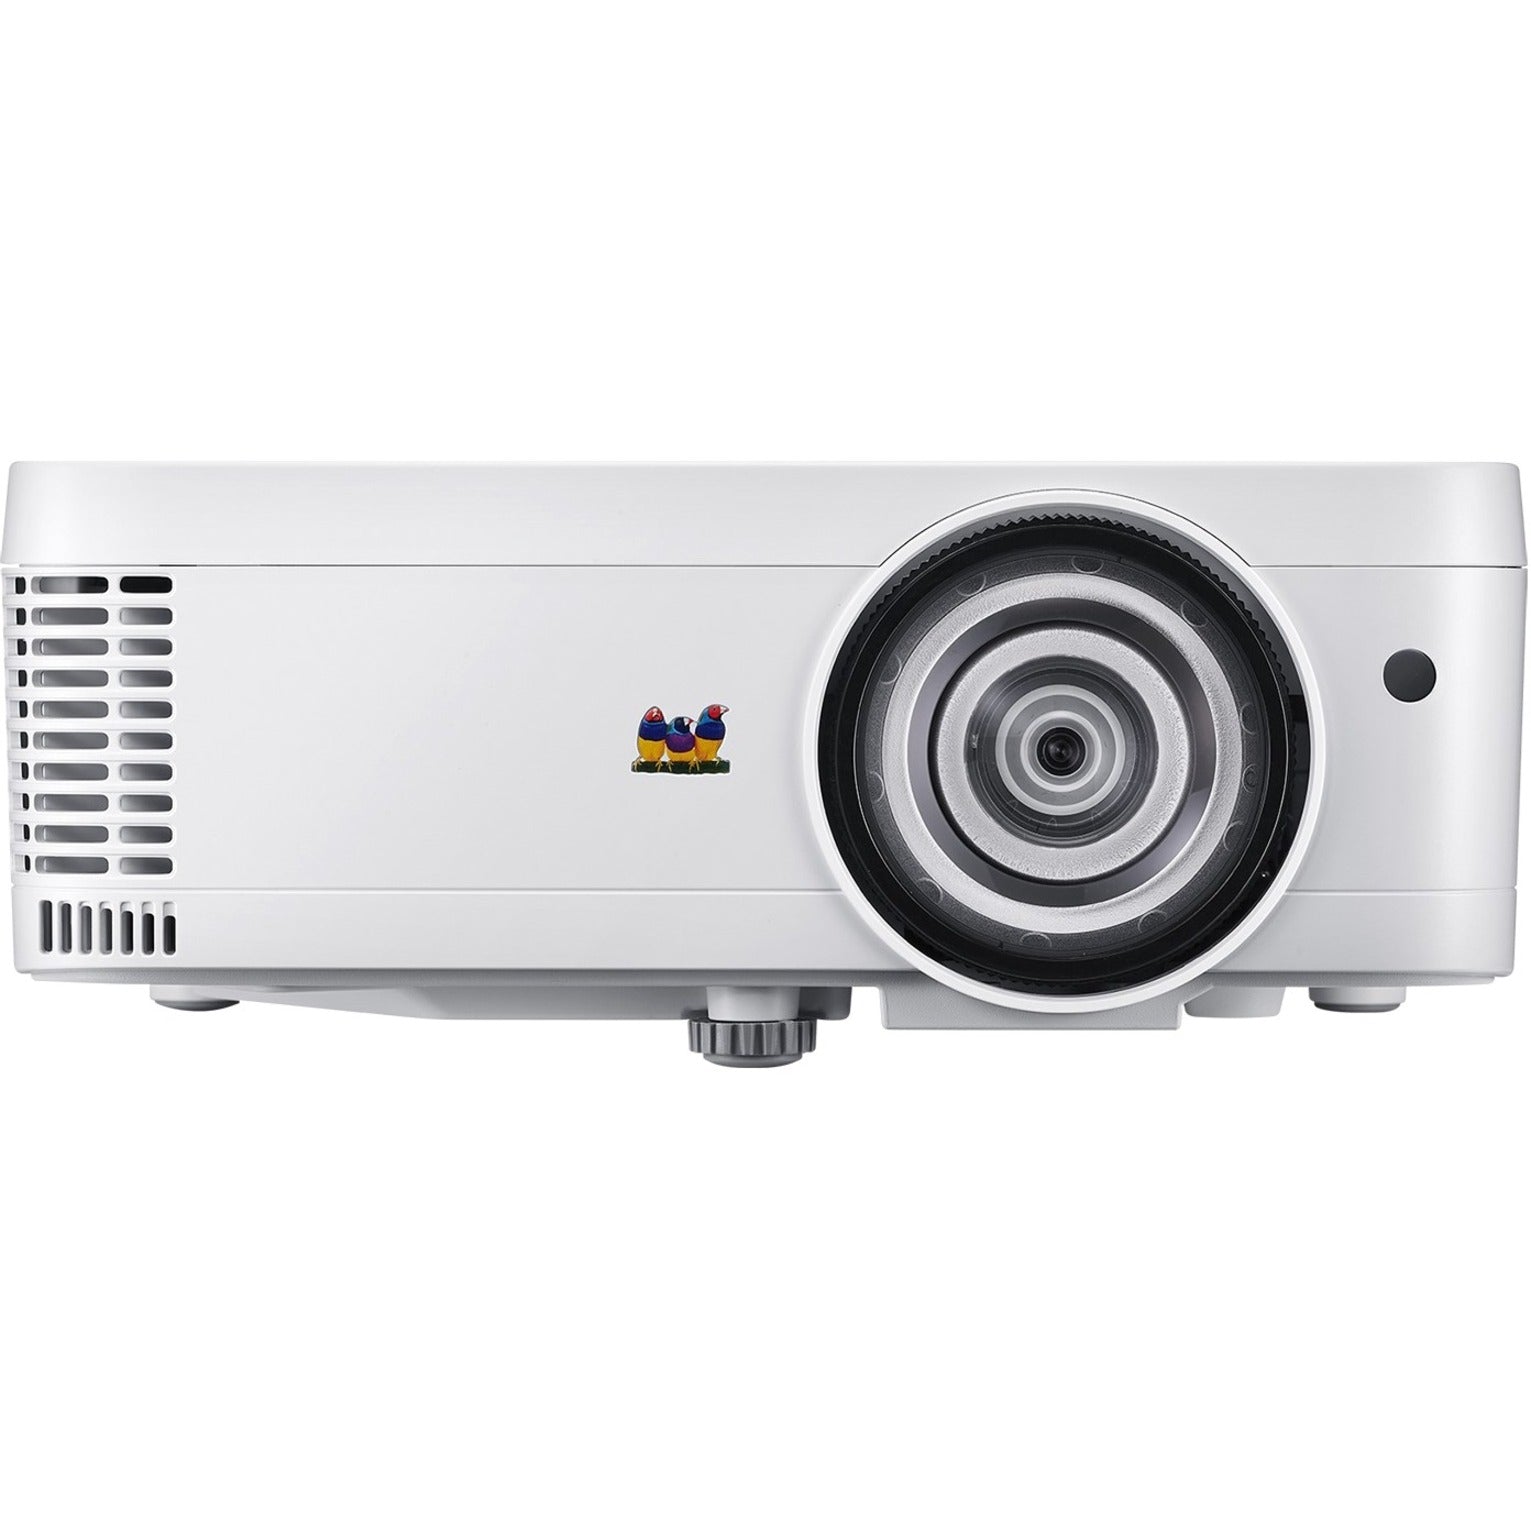 ViewSonic PS600X DLP Projector for Business and Education, Short Throw, 3,500 Lumens, XGA 1024x768 Resolution